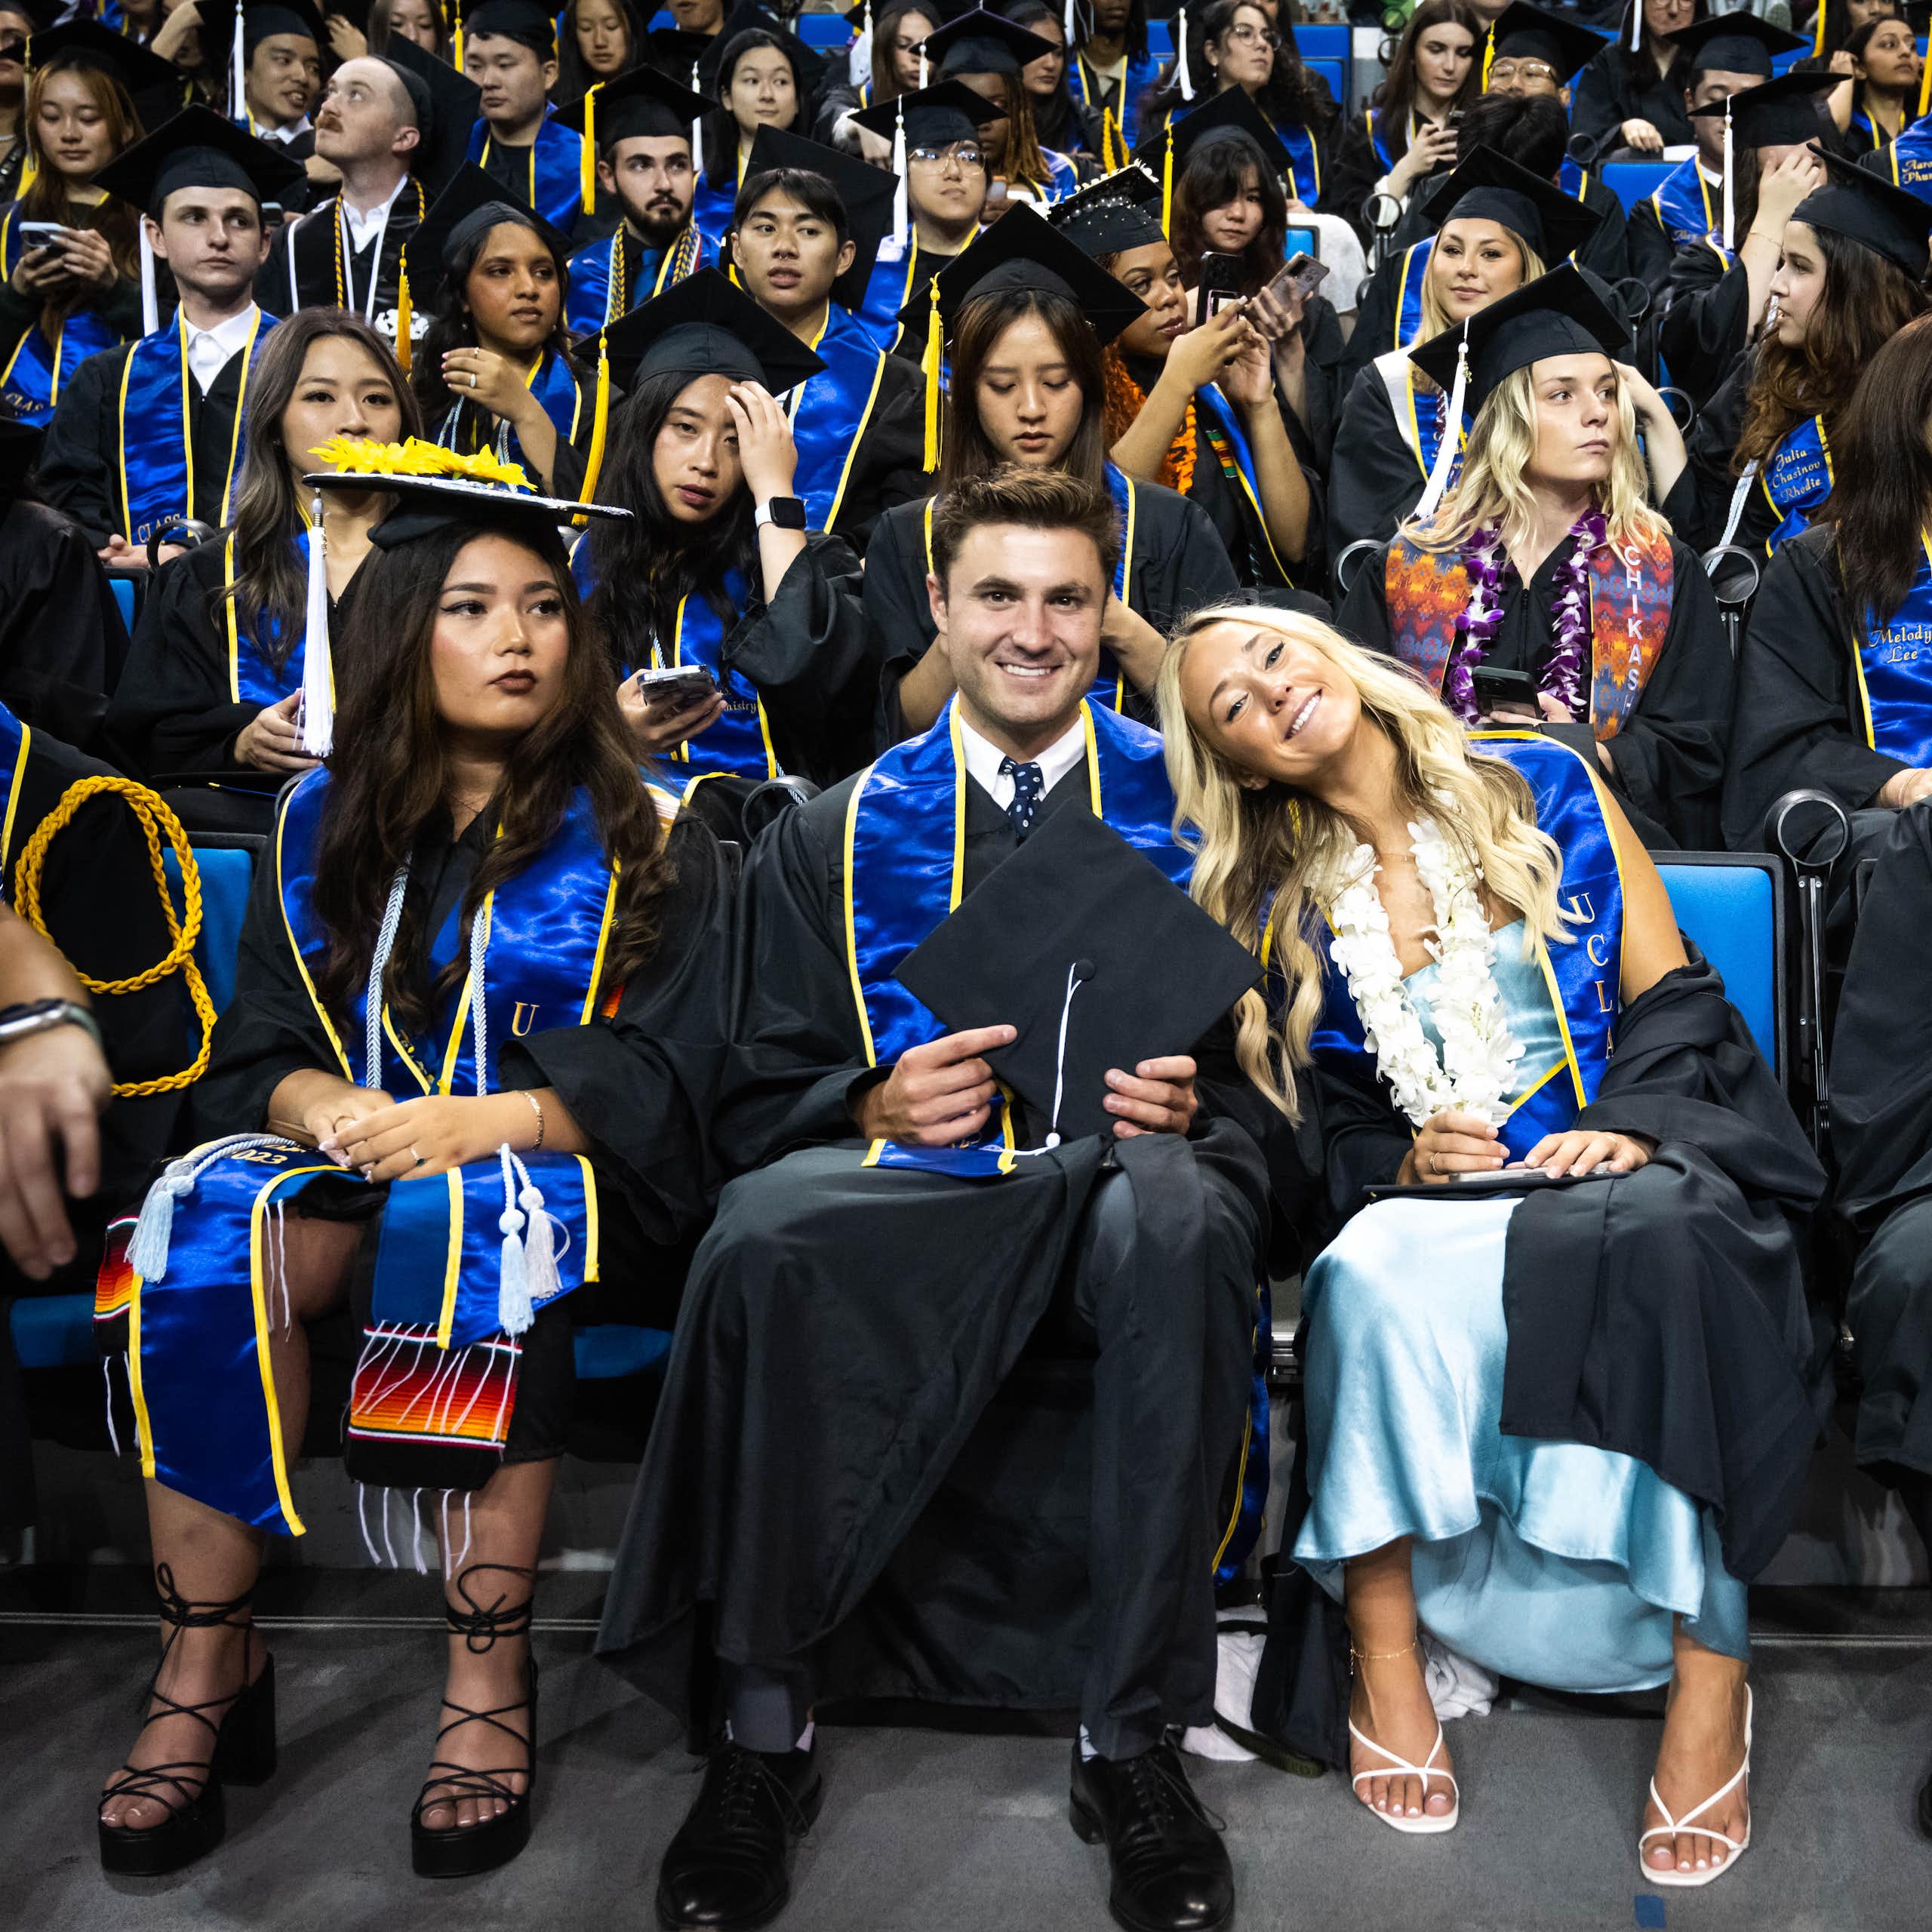 College graduates at a ceremony in their caps and gowns.